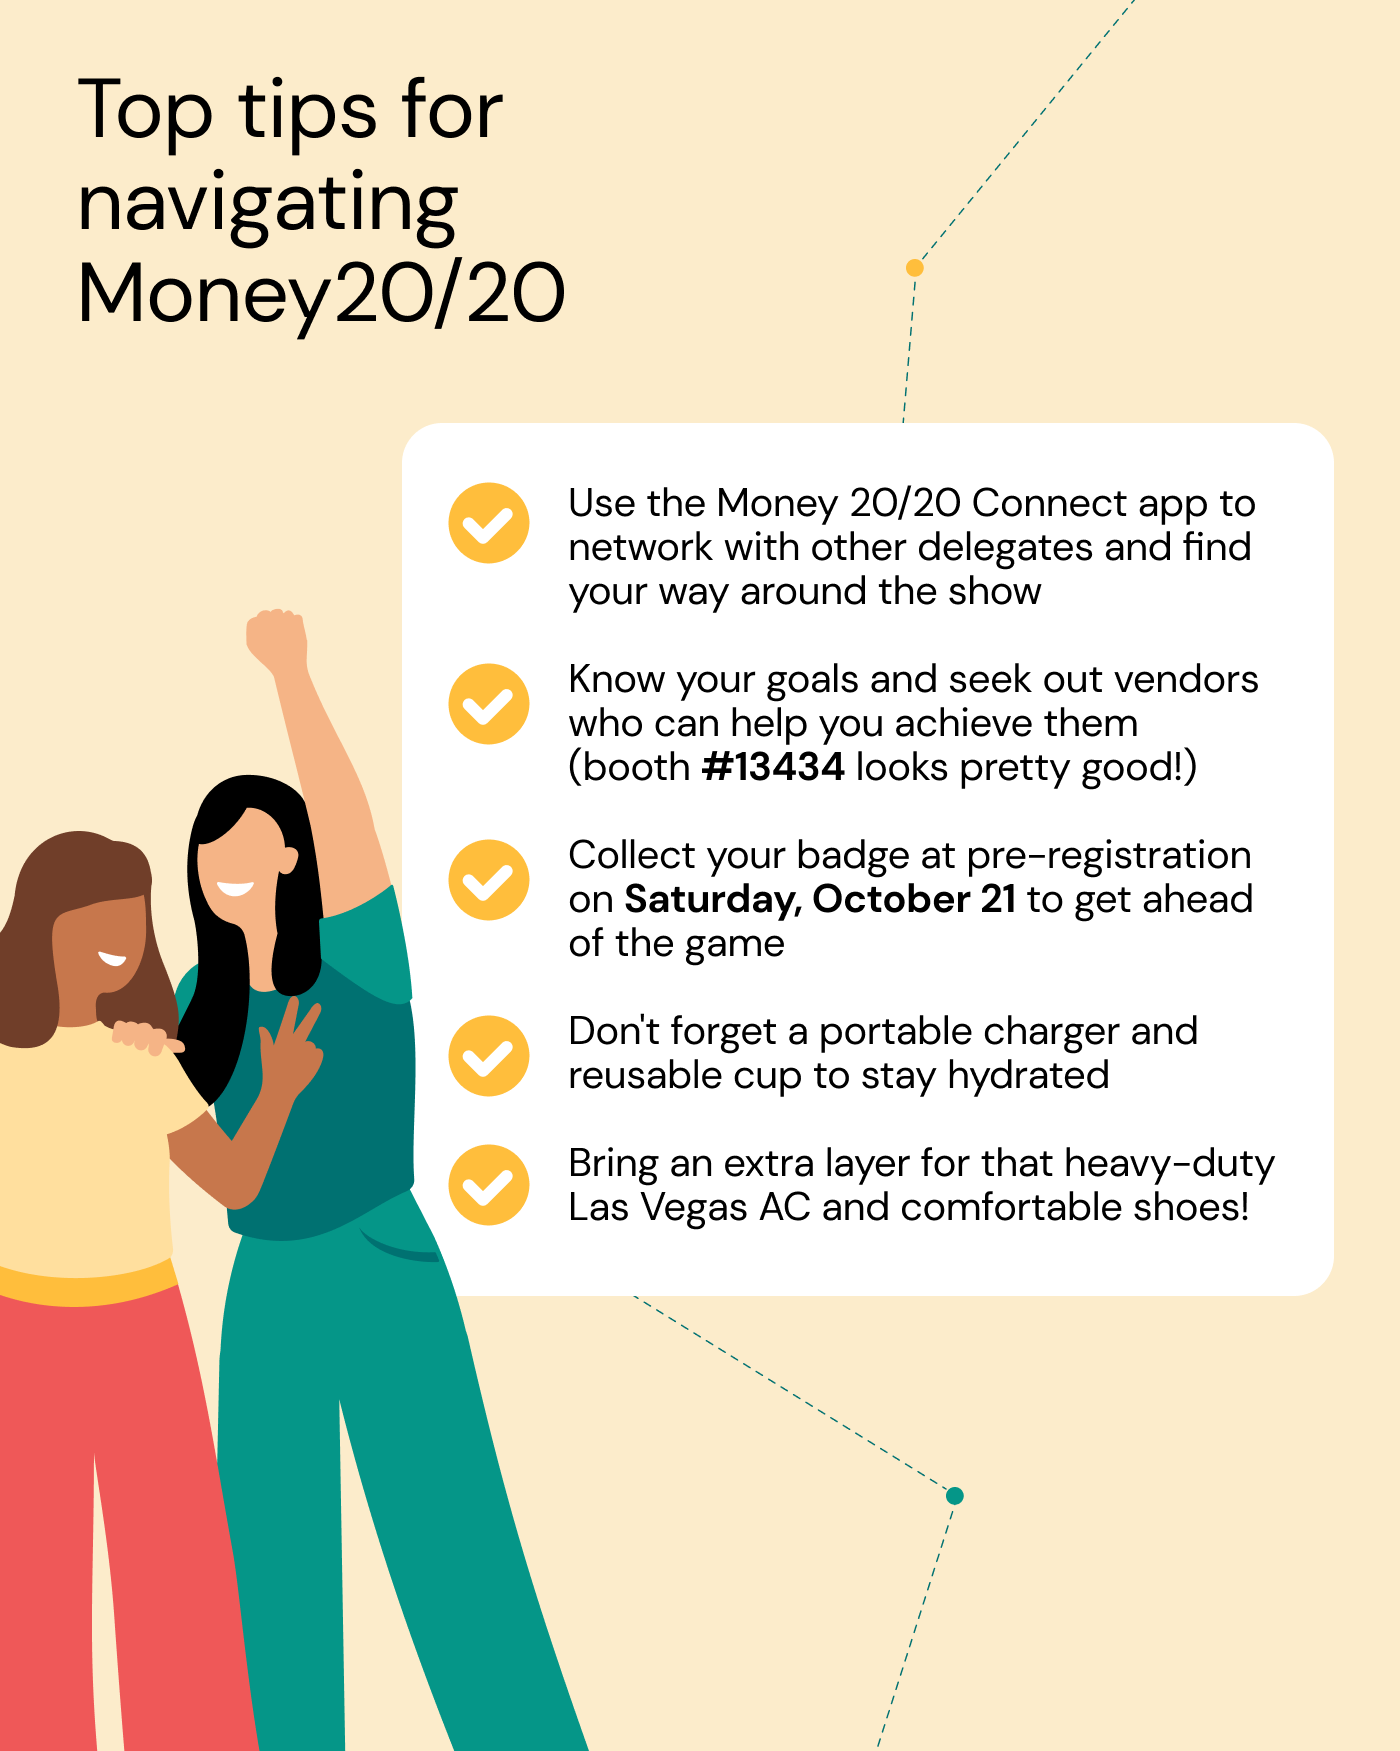 Image showing top tips for Money 2020